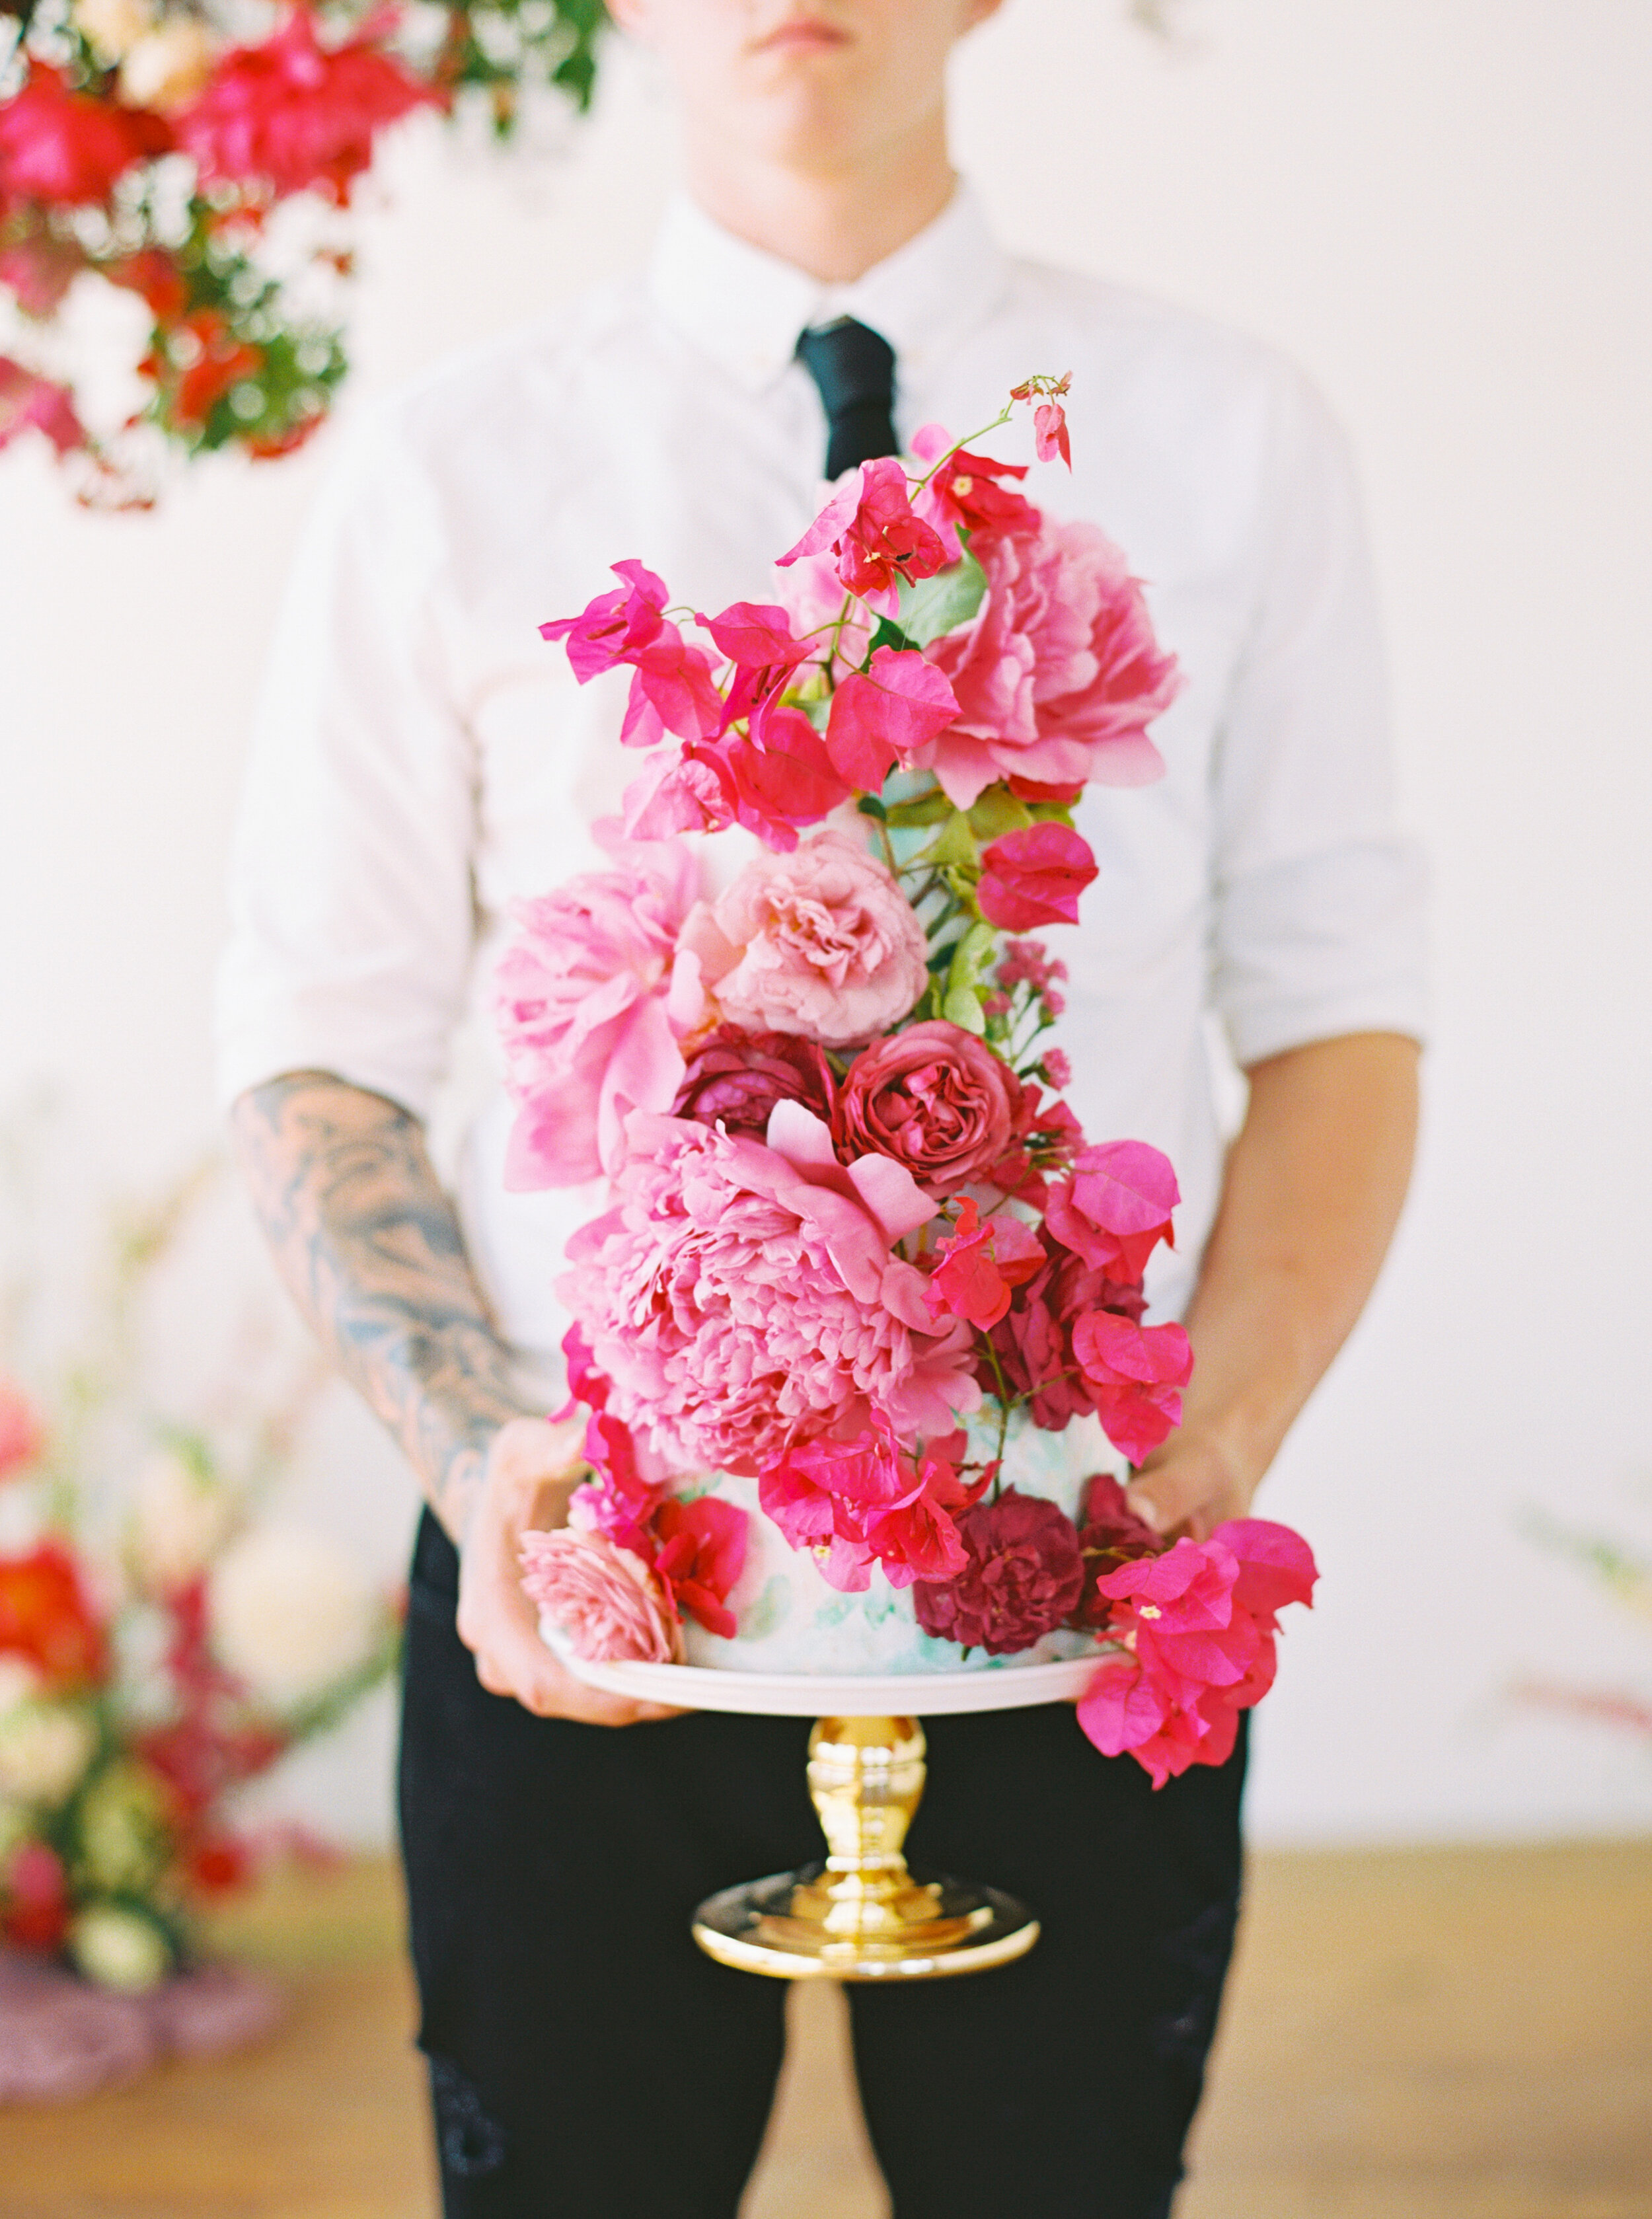 A Romantic Wedding Elopement Filled with Colorful Fuchsia - Sarahi Hadden Submission-57.jpg